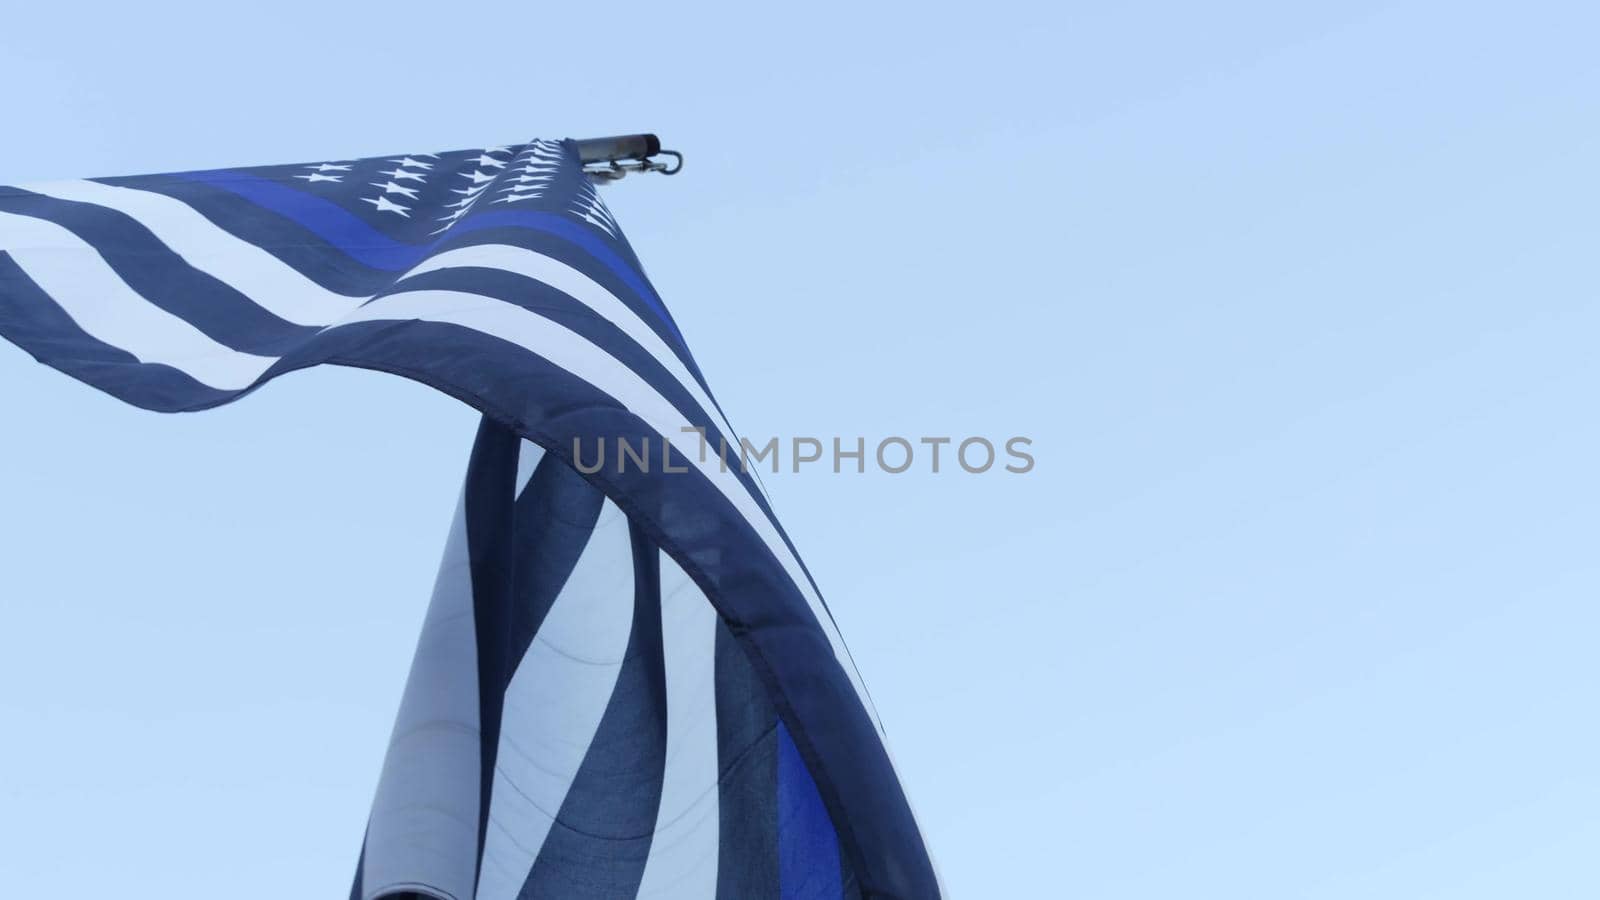 Black white american monochrome flag with blue stripe or line, police support. Solid star-spangled banner waving in wind breeze.